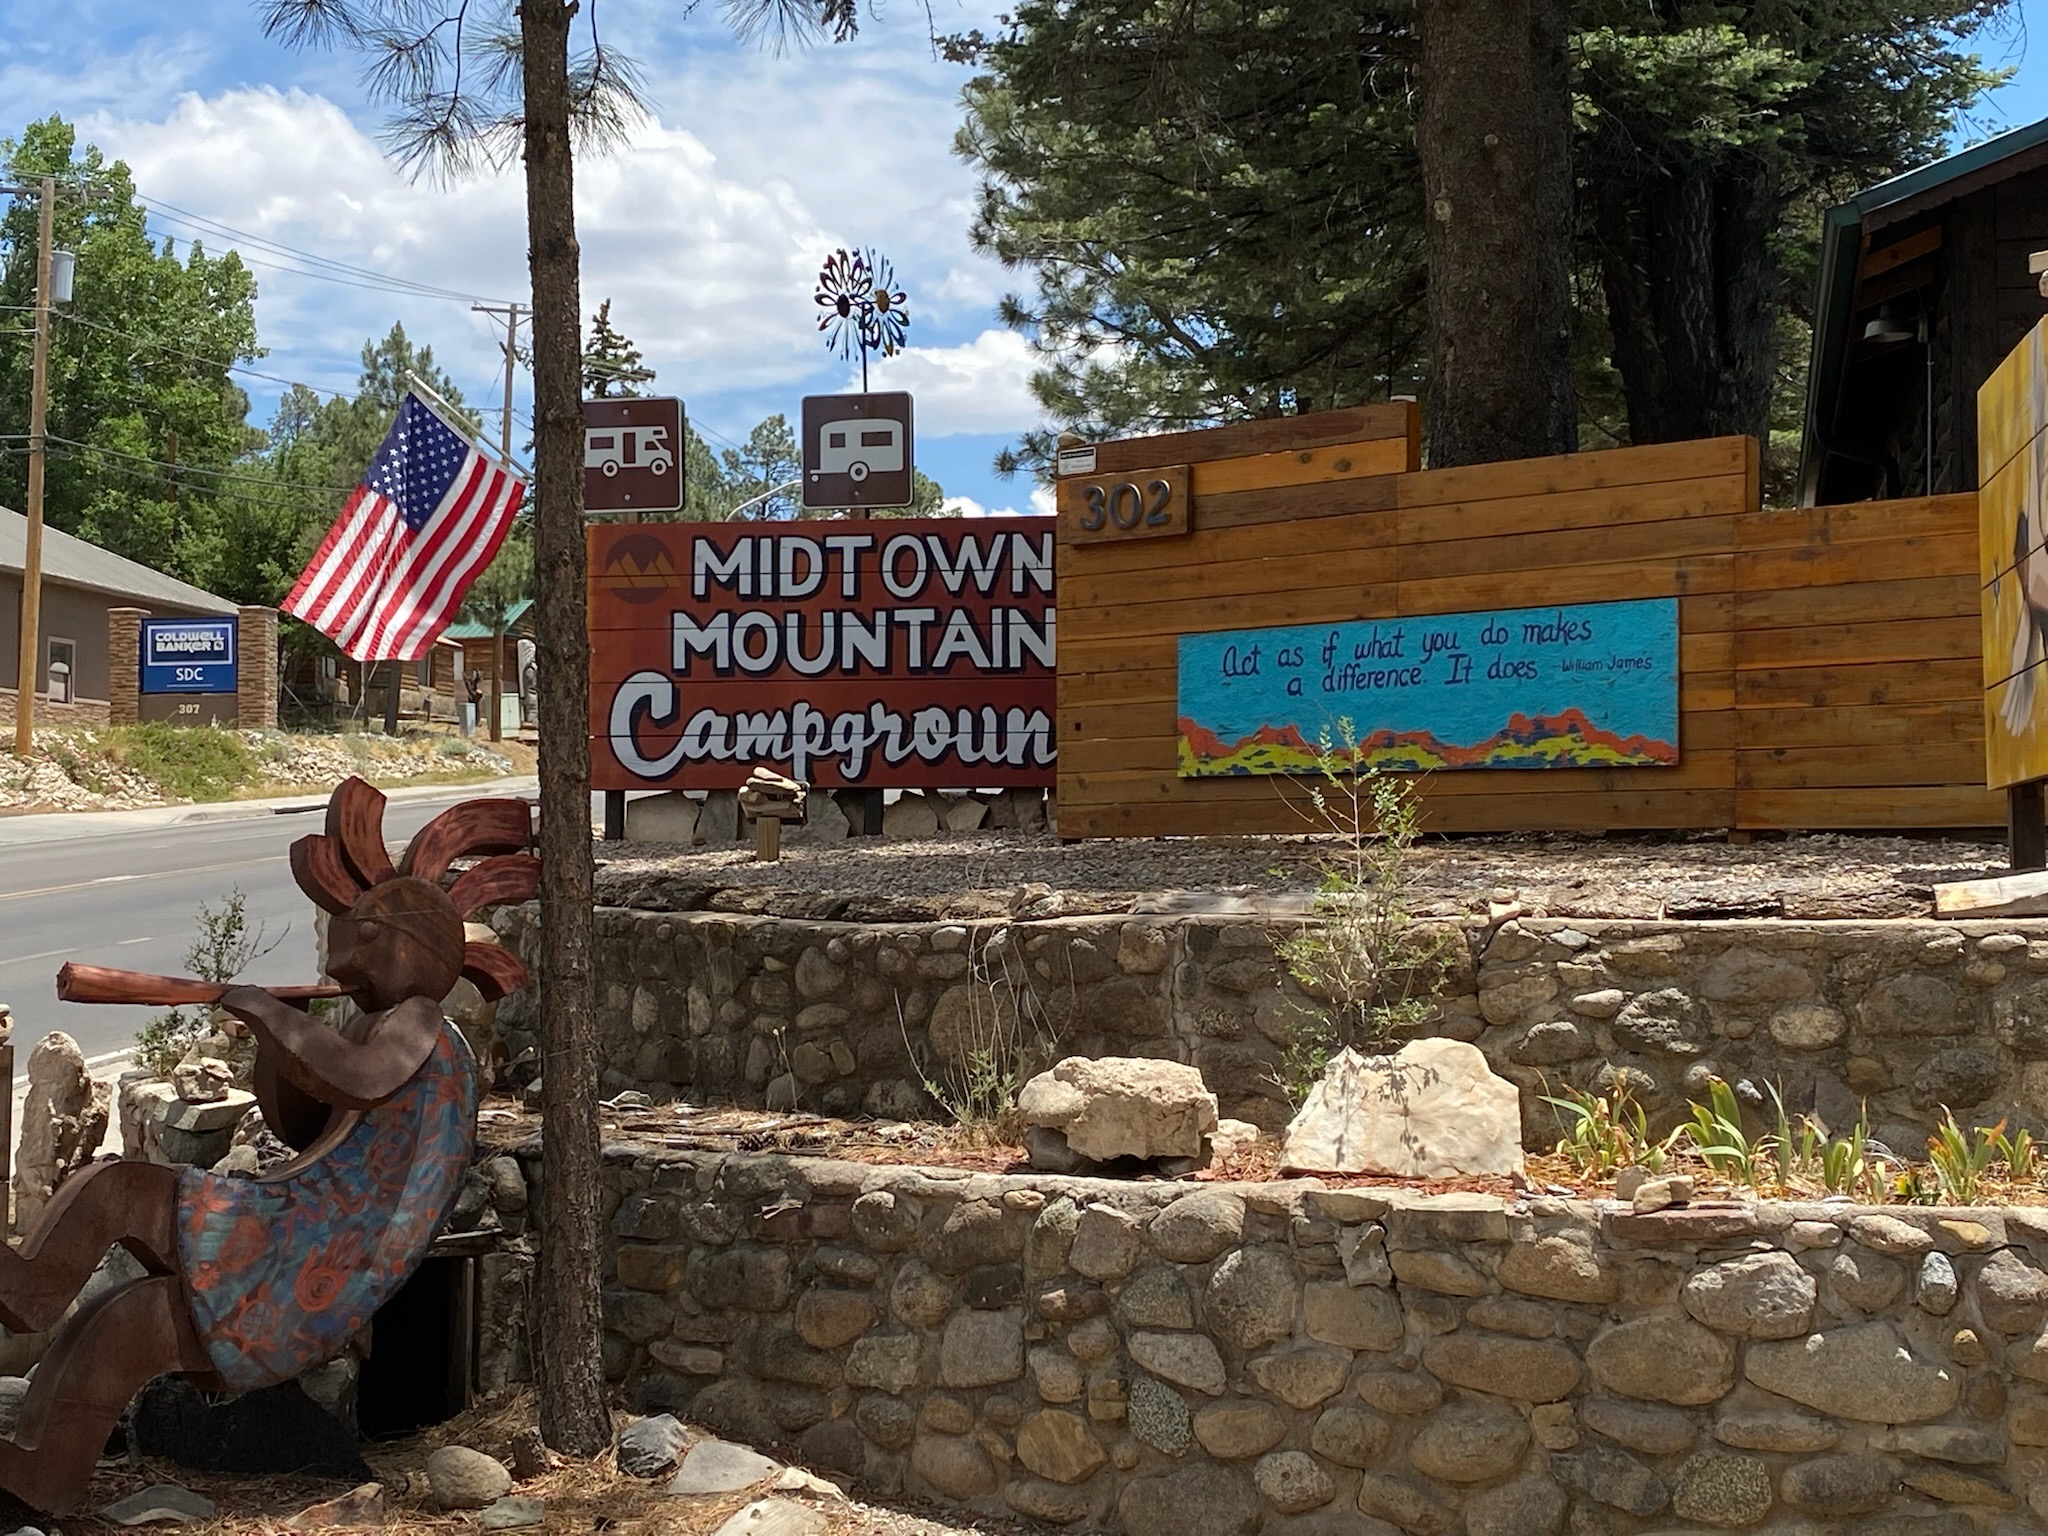 A campground entrance with sculpture of Native American playing flute.